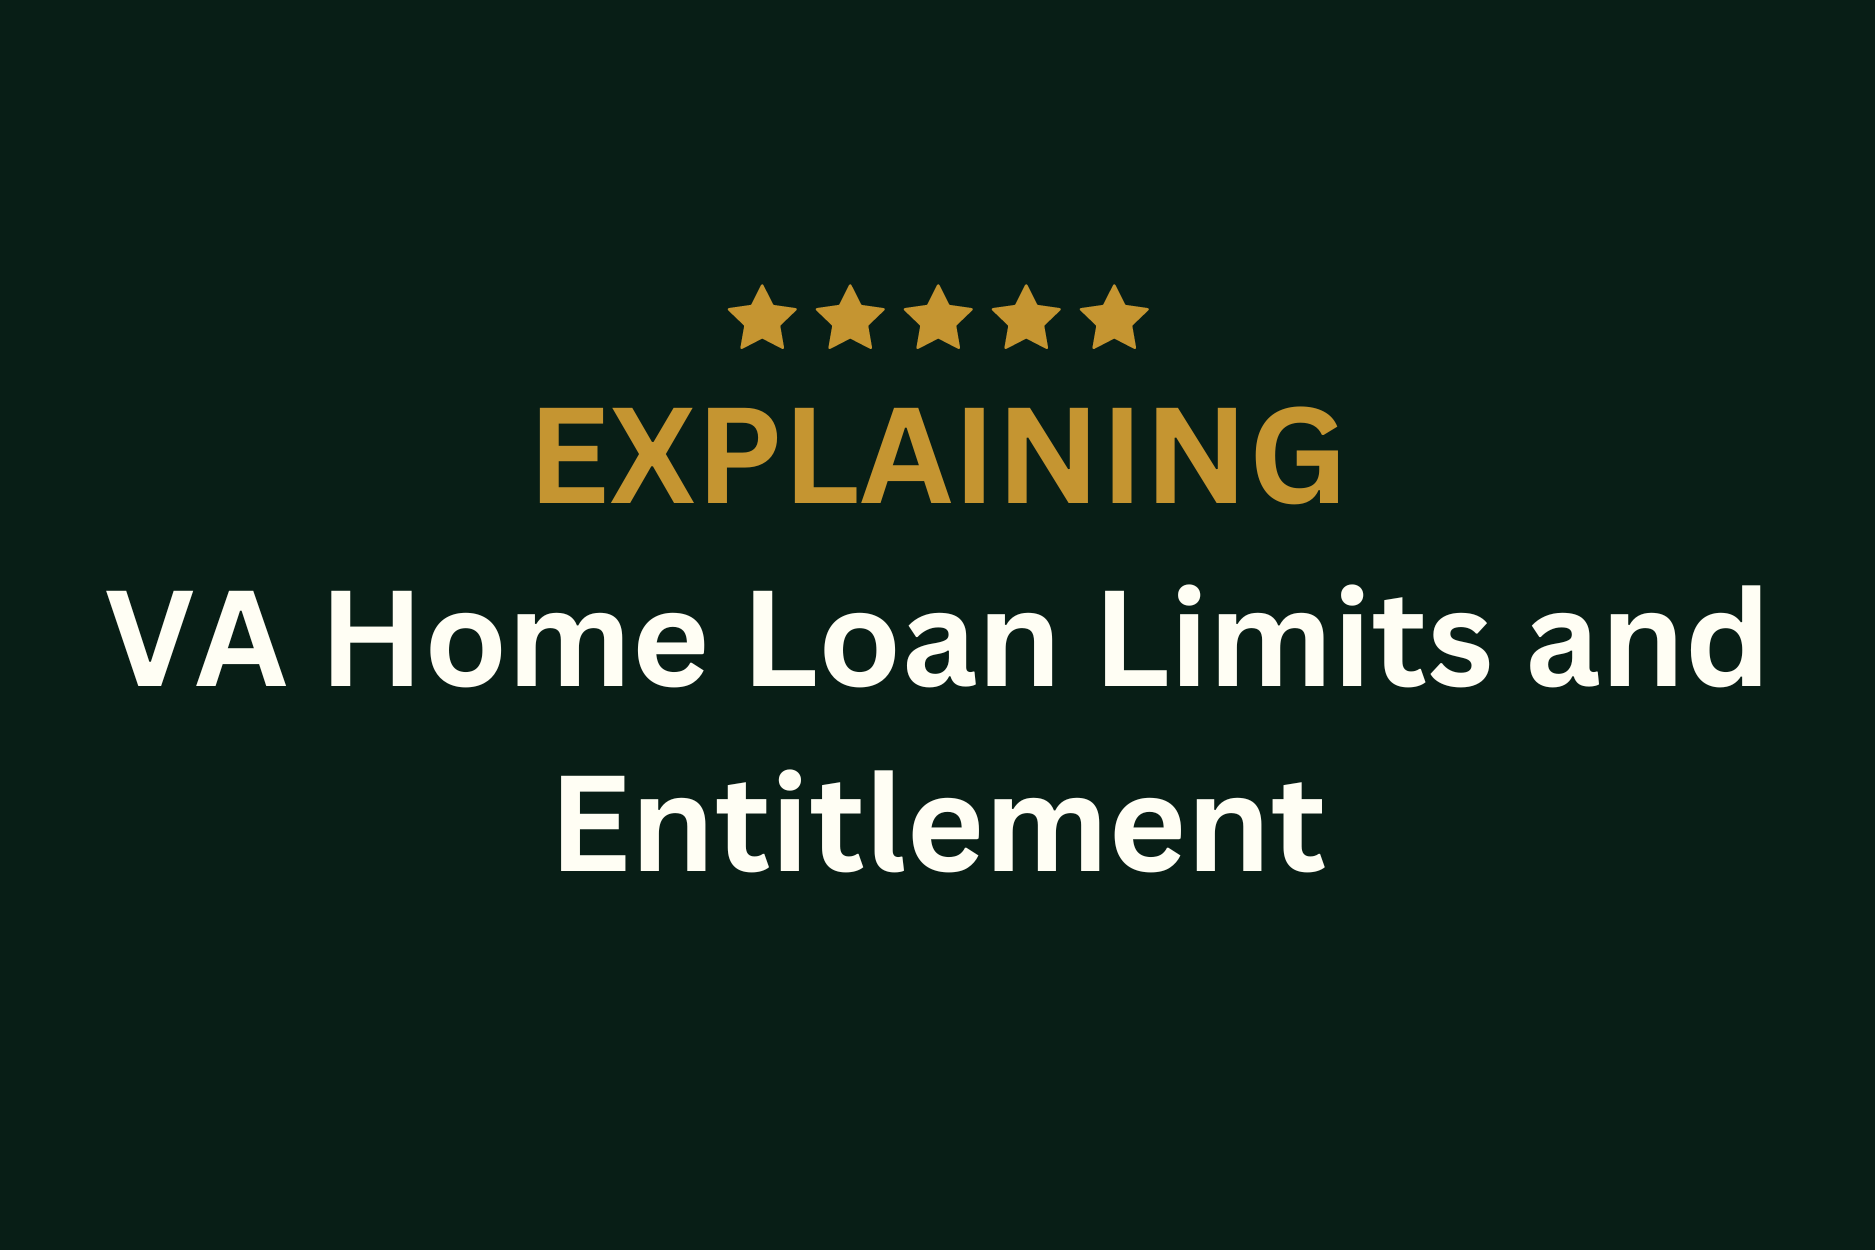 How VA Home Loan Limits and Entitlement Work Together